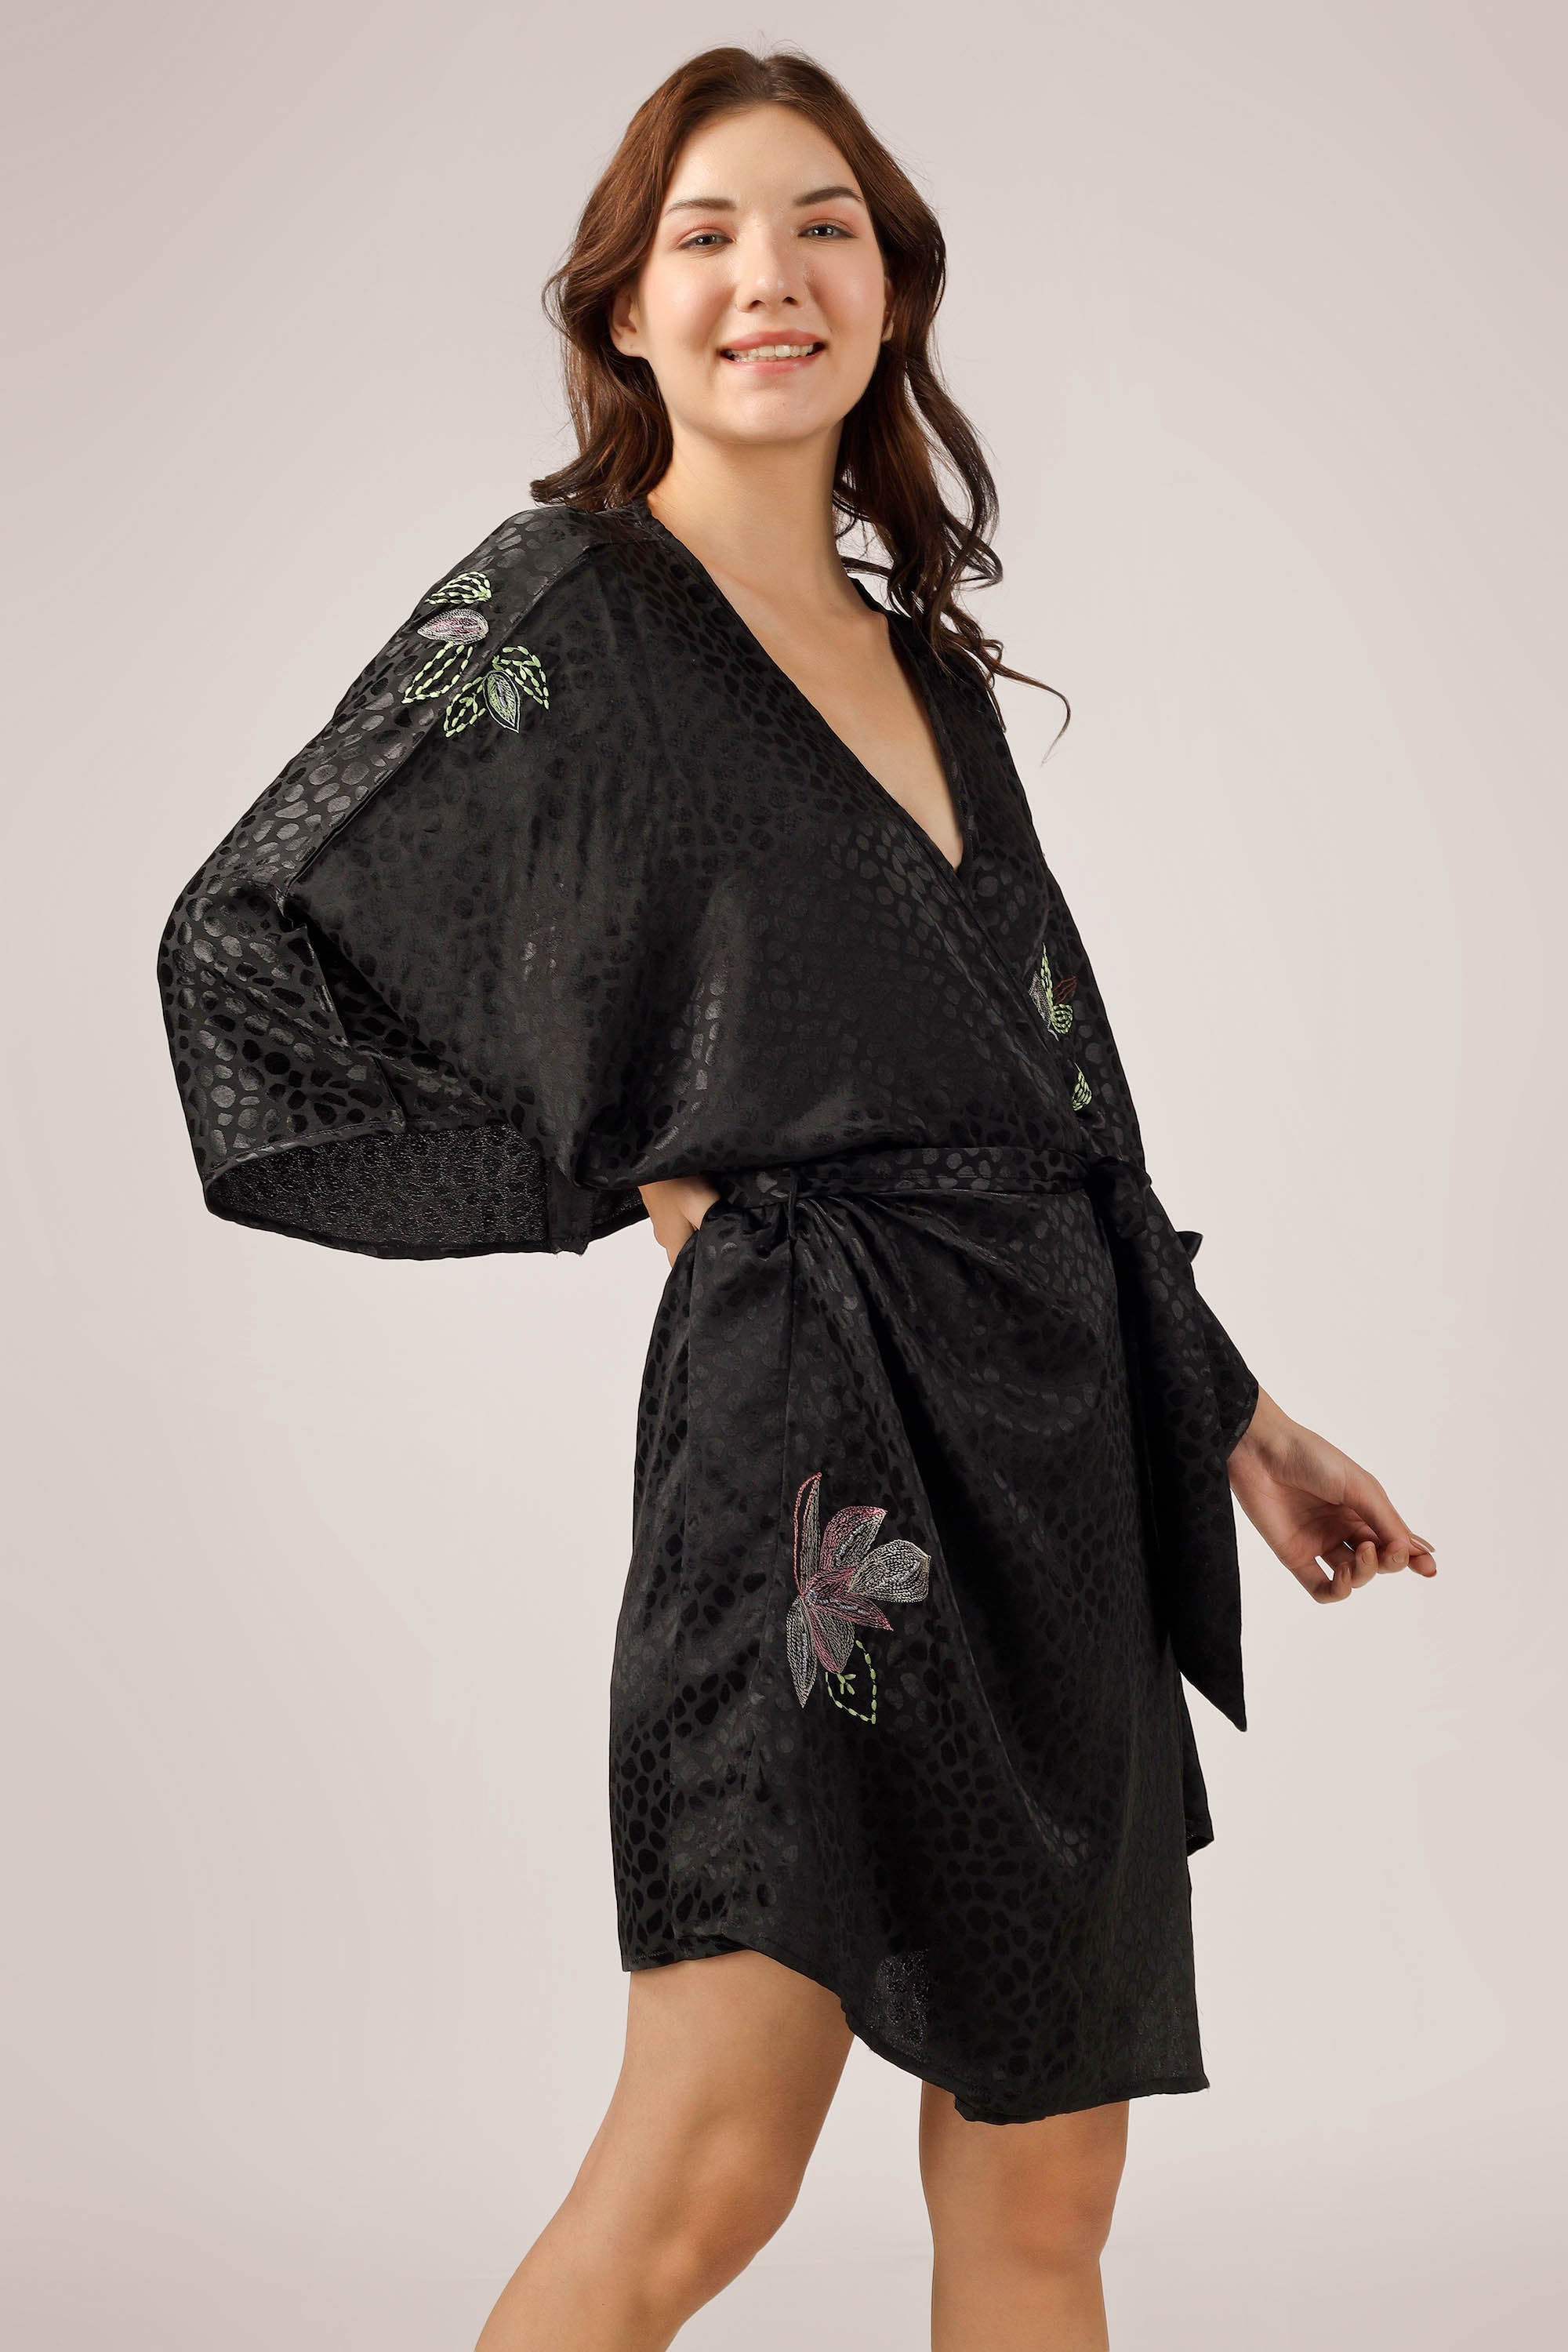 Buy Robes for Women Online at Best Prices on After Dark – After Dark